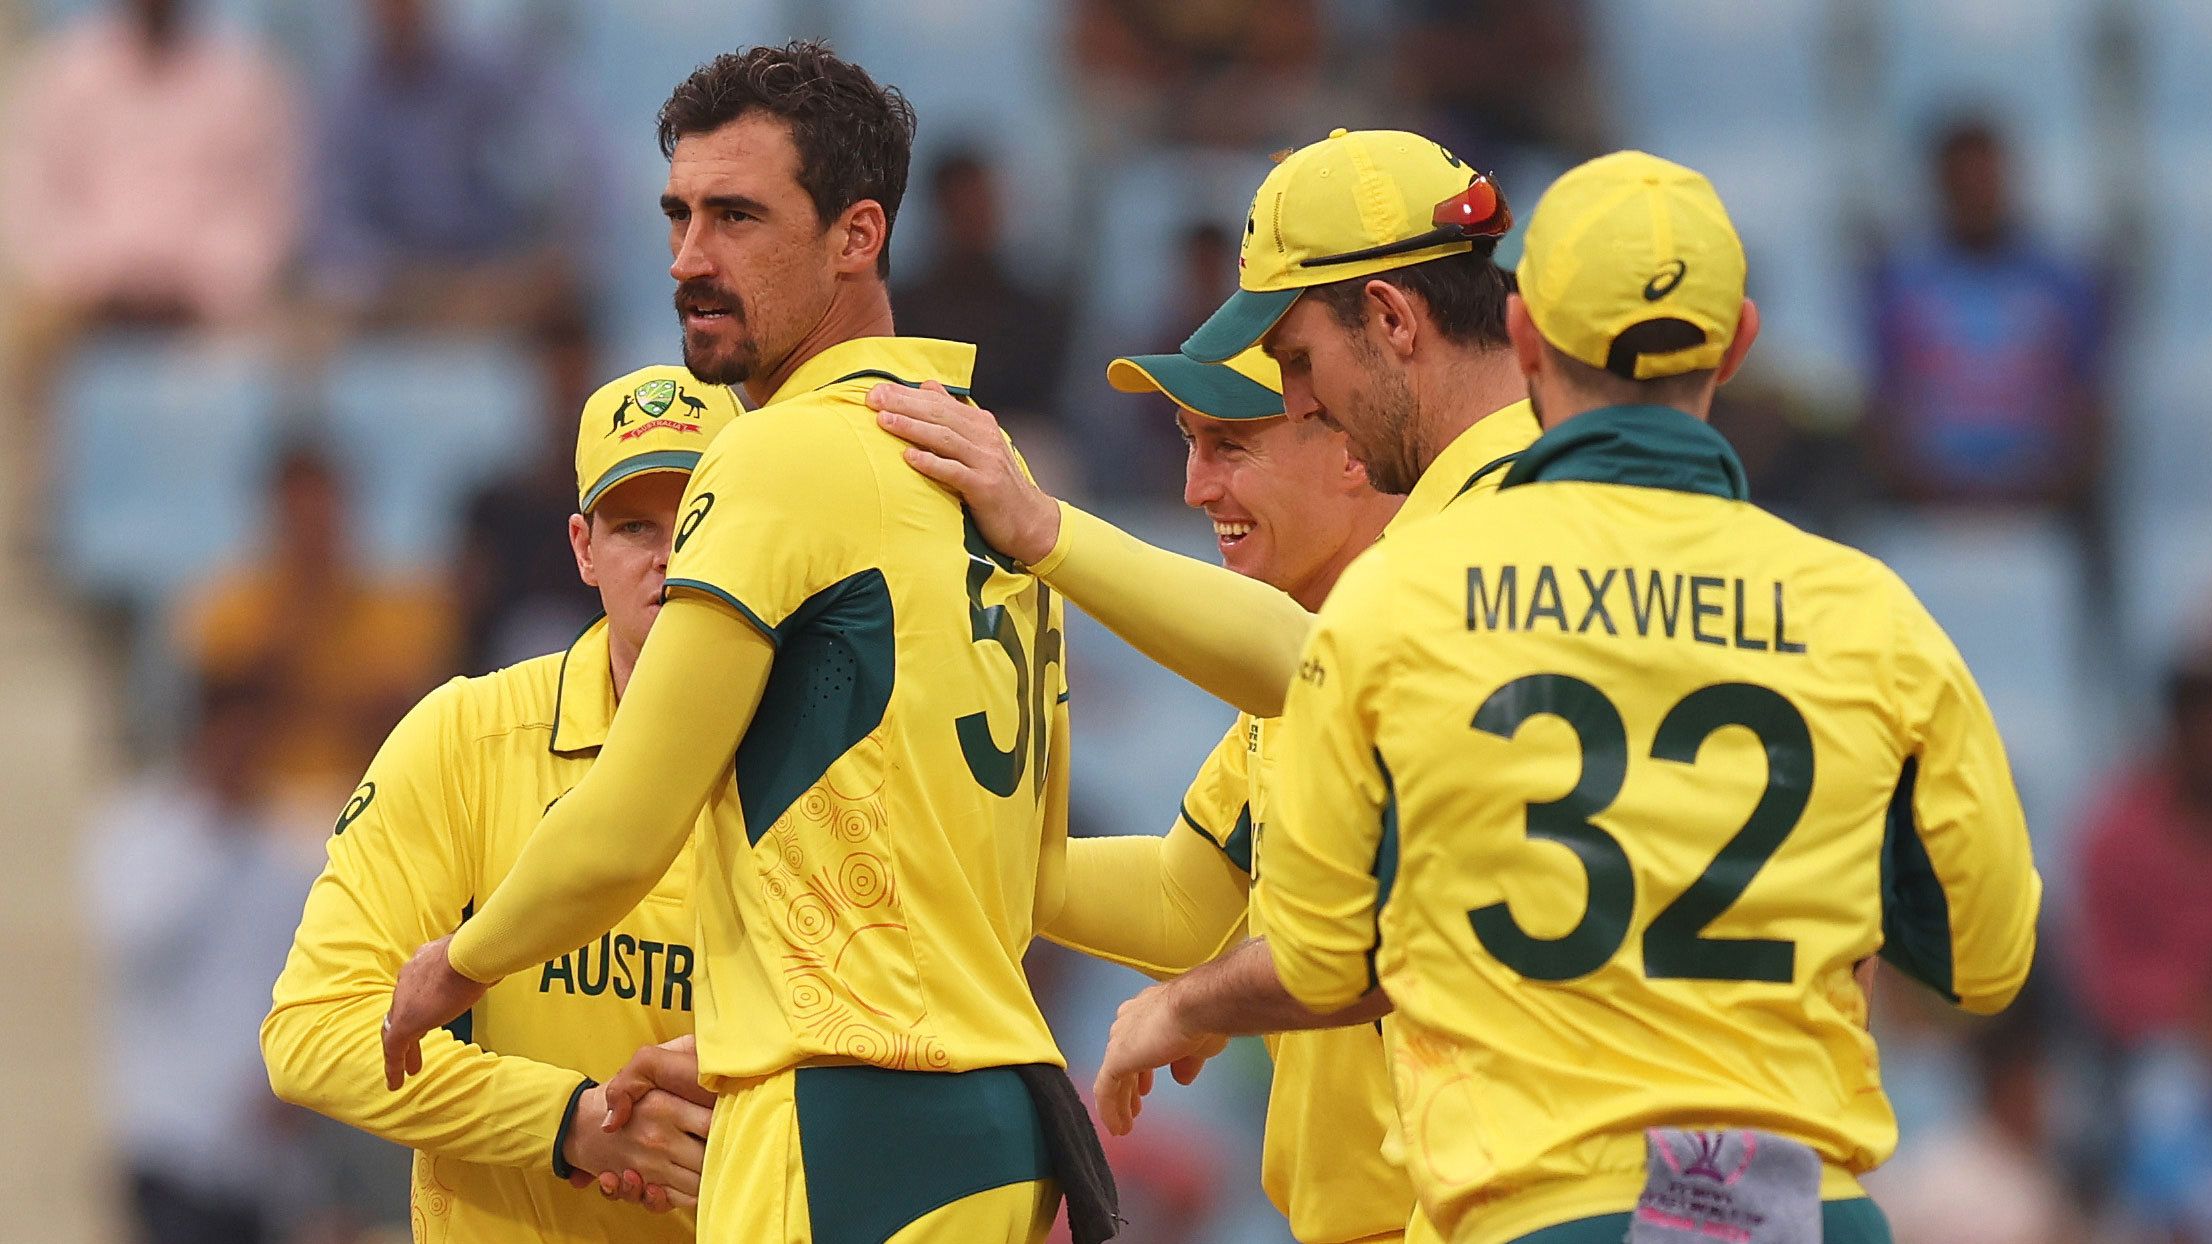 'Lost that argument': Mitchell Starc admits his displeasure at being rested as Ian Healy criticises bowler's lack of potency 